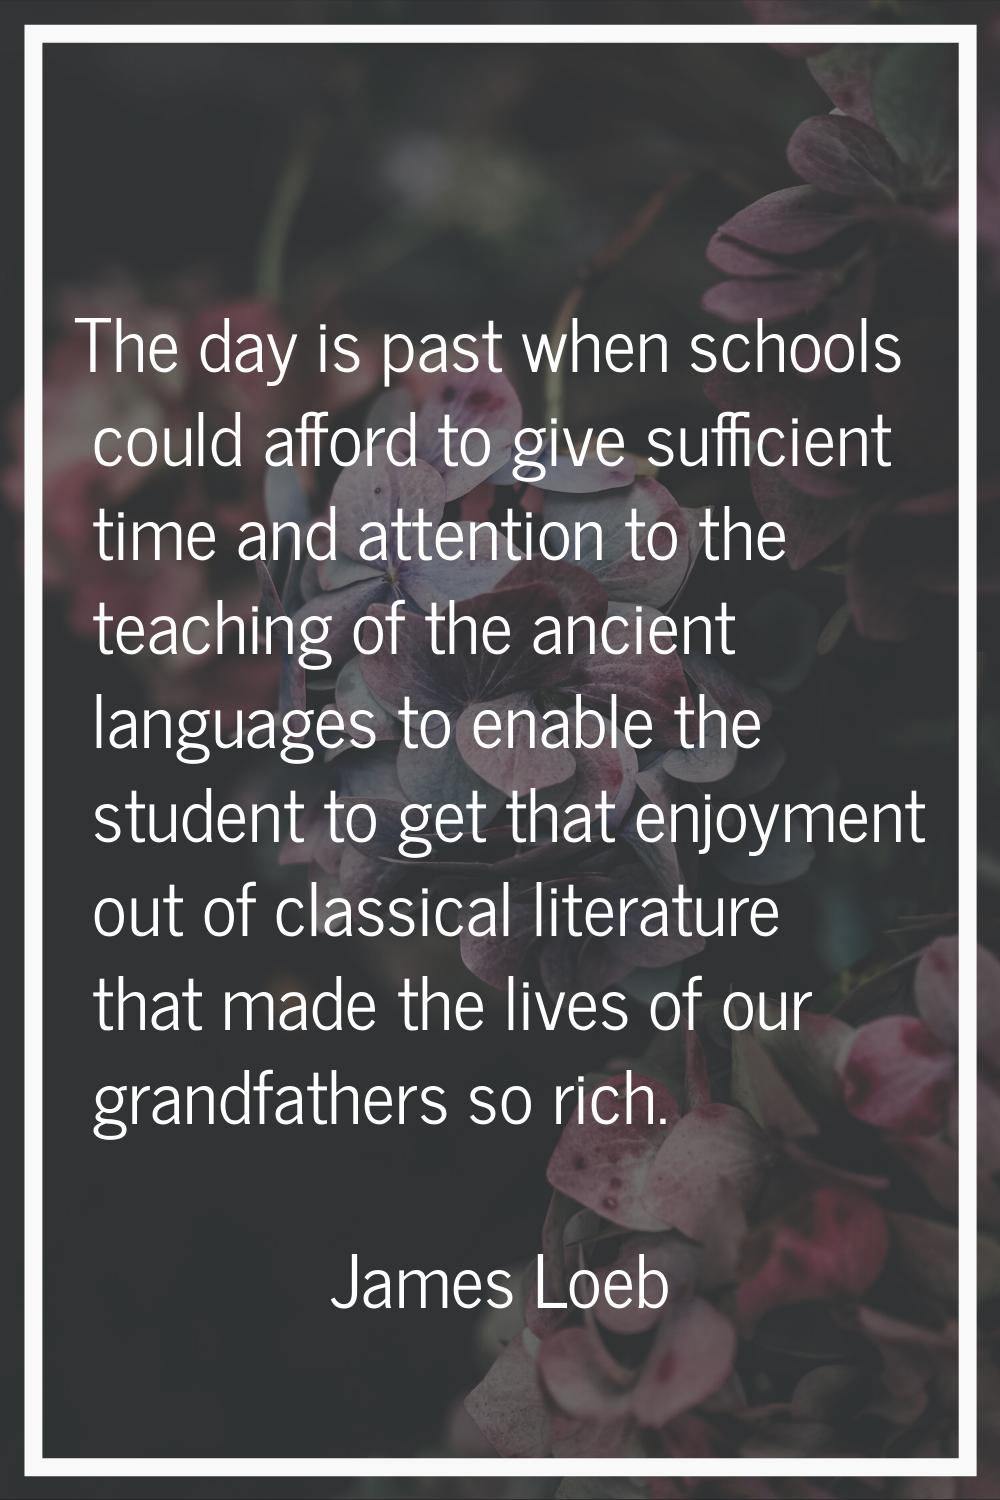 The day is past when schools could afford to give sufficient time and attention to the teaching of 